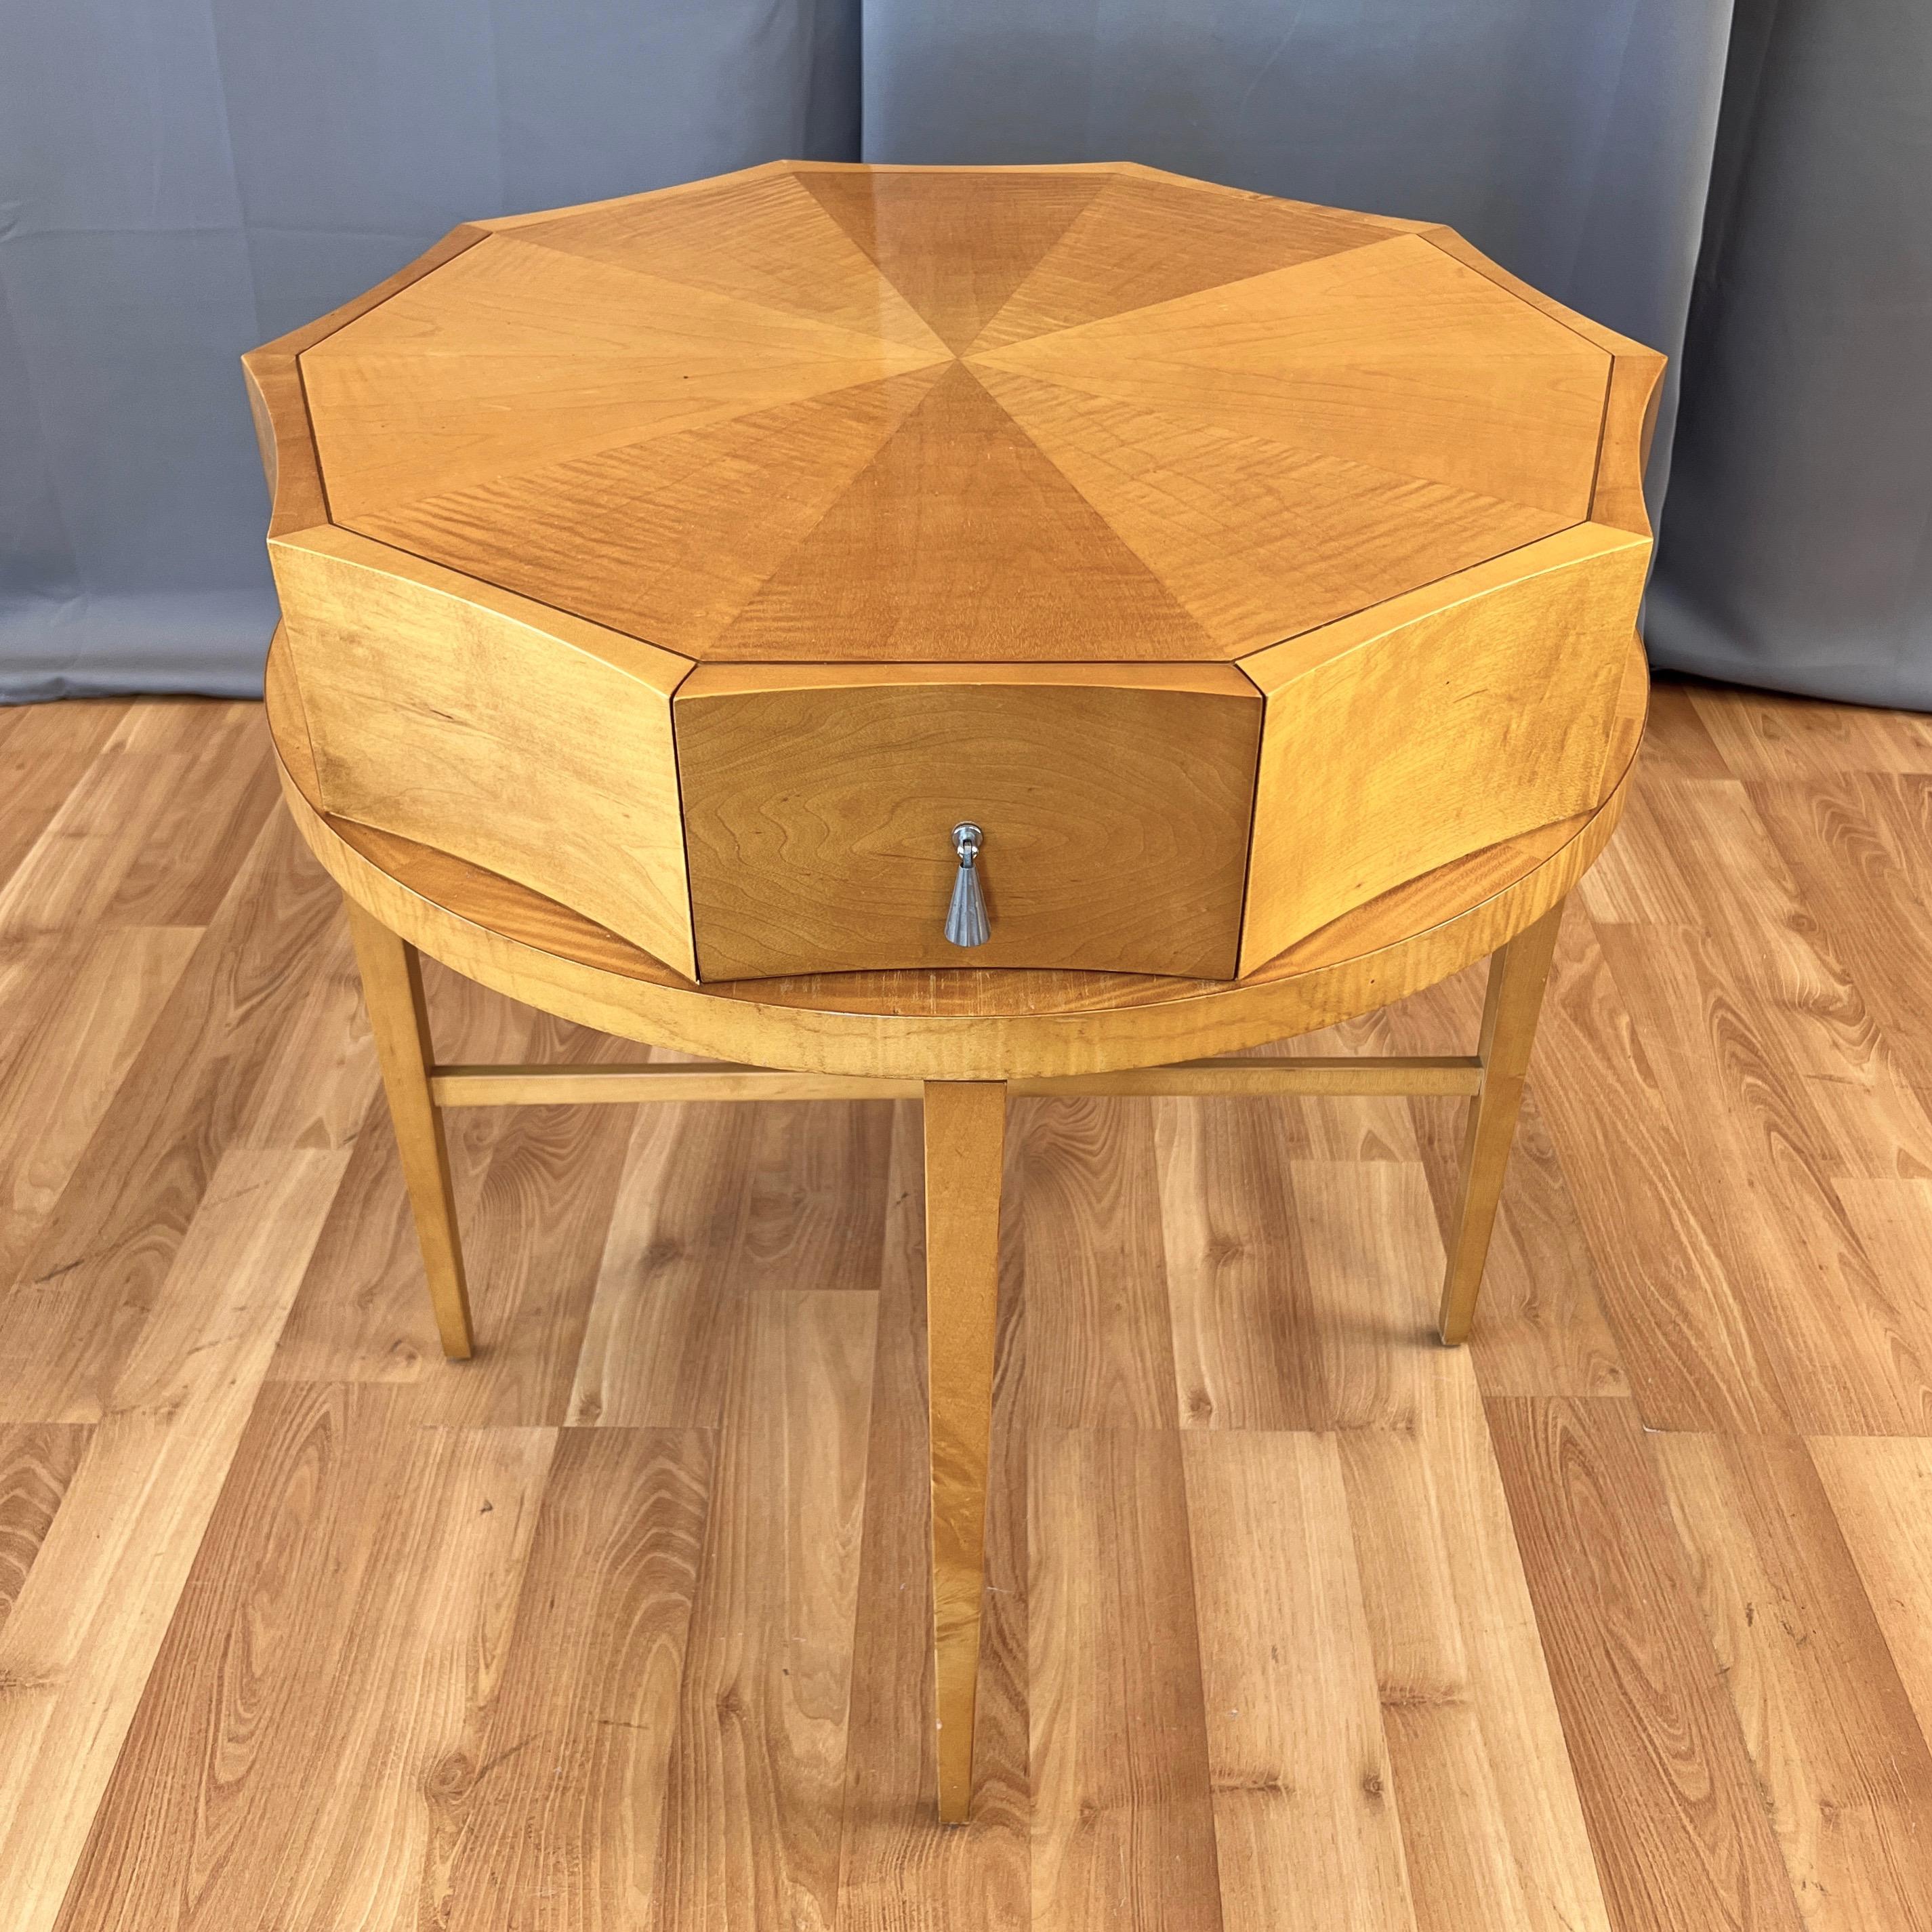 A very uncommon circa 1990 Archetype model no. 3967 round decagonal primavera lamp, side, or occasional table with drawer by Michael Vanderbyl for Baker Furniture.

Top with ten triangular sections framed by concave sides that are supported by a